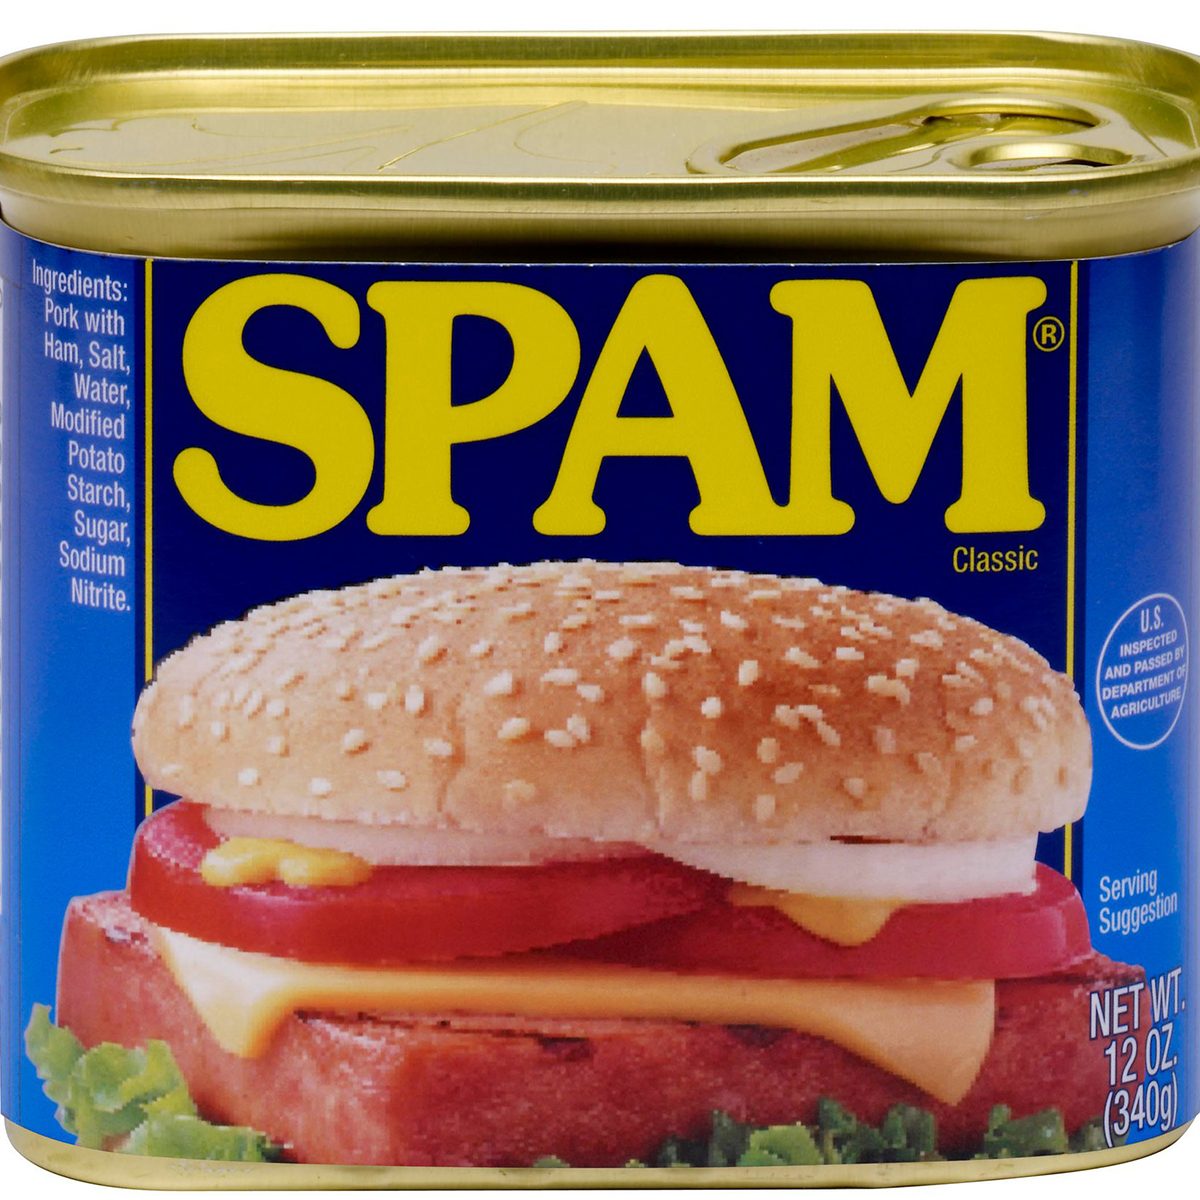 <p><strong><a class="SWhtmlLink" href="http://www.spam.com" rel="noopener">Spam</a>, Austin </strong></p> <p>When Hormel introduced Spam to the world in 1937, they had no idea it would become an international favorite. It's so popular these days in the Philippines that the restaurant Spam Jam serves nothing but Spam-inspired dishes!</p> <p><a class="SWhtmlLink" href="https://www.tasteofhome.com/article/spam/" rel="noreferrer noopener">Learn more about everyone's favorite meat-in-a-can.</a></p>